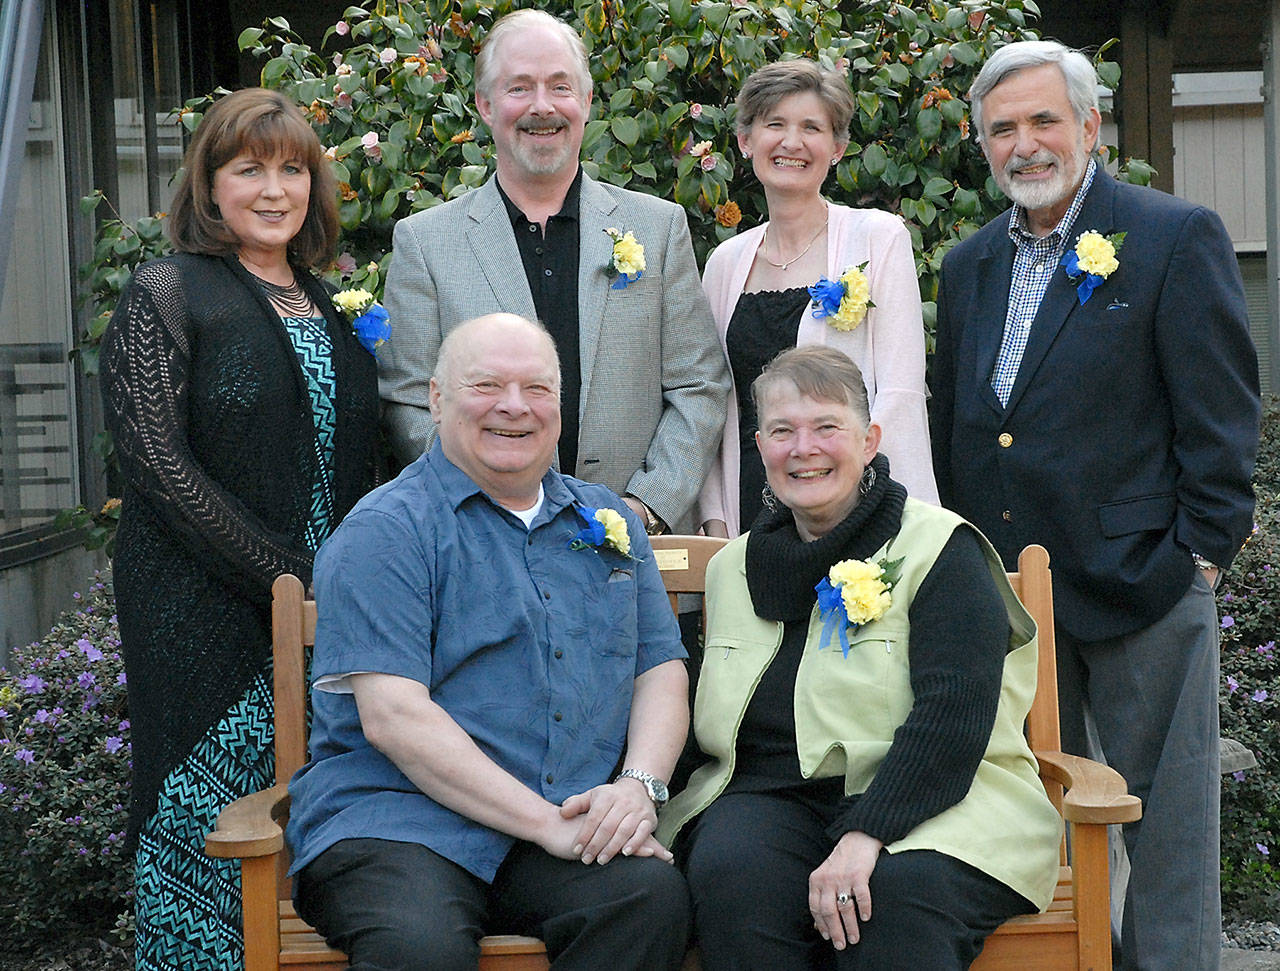 Clallam County Community Service Award recipients gather before Thursday’s awards ceremony at Holy Trinity Lutheran Church in Port Angeles. Receiving awards were, front row from left, Jim and Donna Buck, and, back row from left, Carol Sinton, Jim Hallett, Kim Rosales and John Brewer. (Keith Thorpe/Peninsula Daily News)